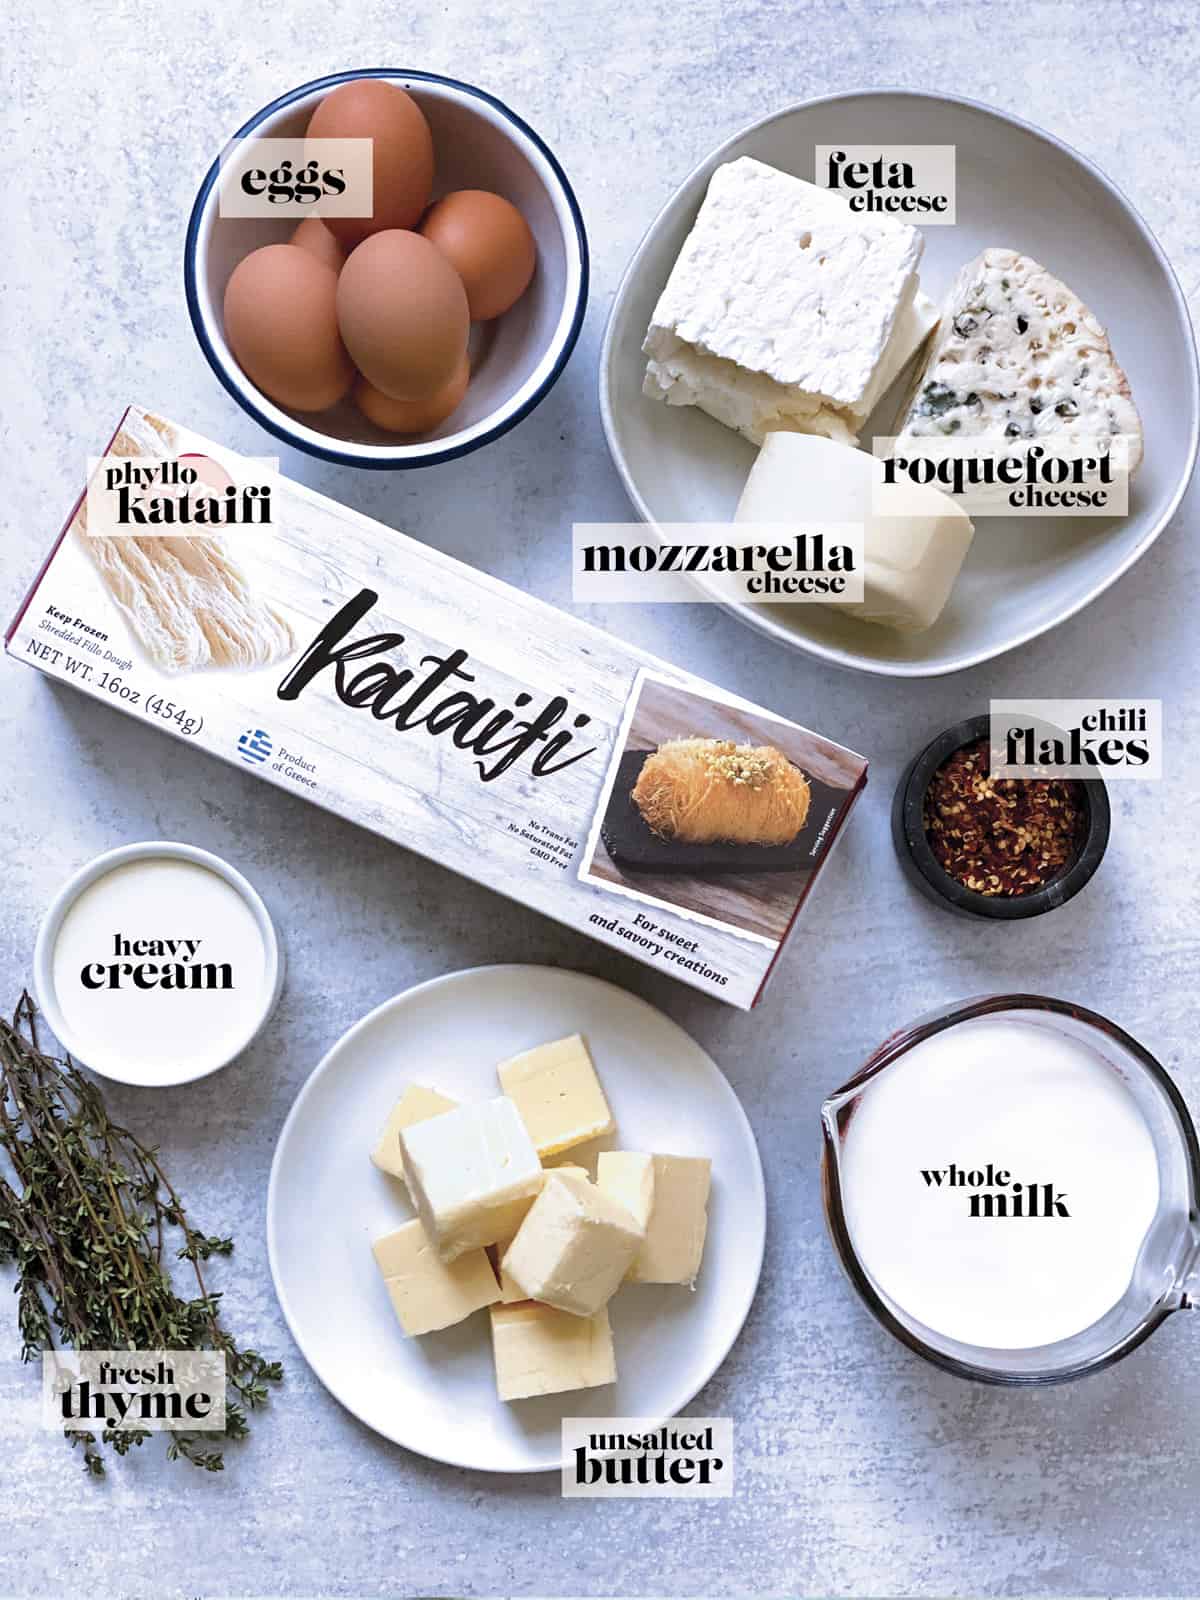 Ingredients for cheese pie. Eggs, a bowl with various cheese blocks, herbs, milk butter, phyllo pastry and cream.